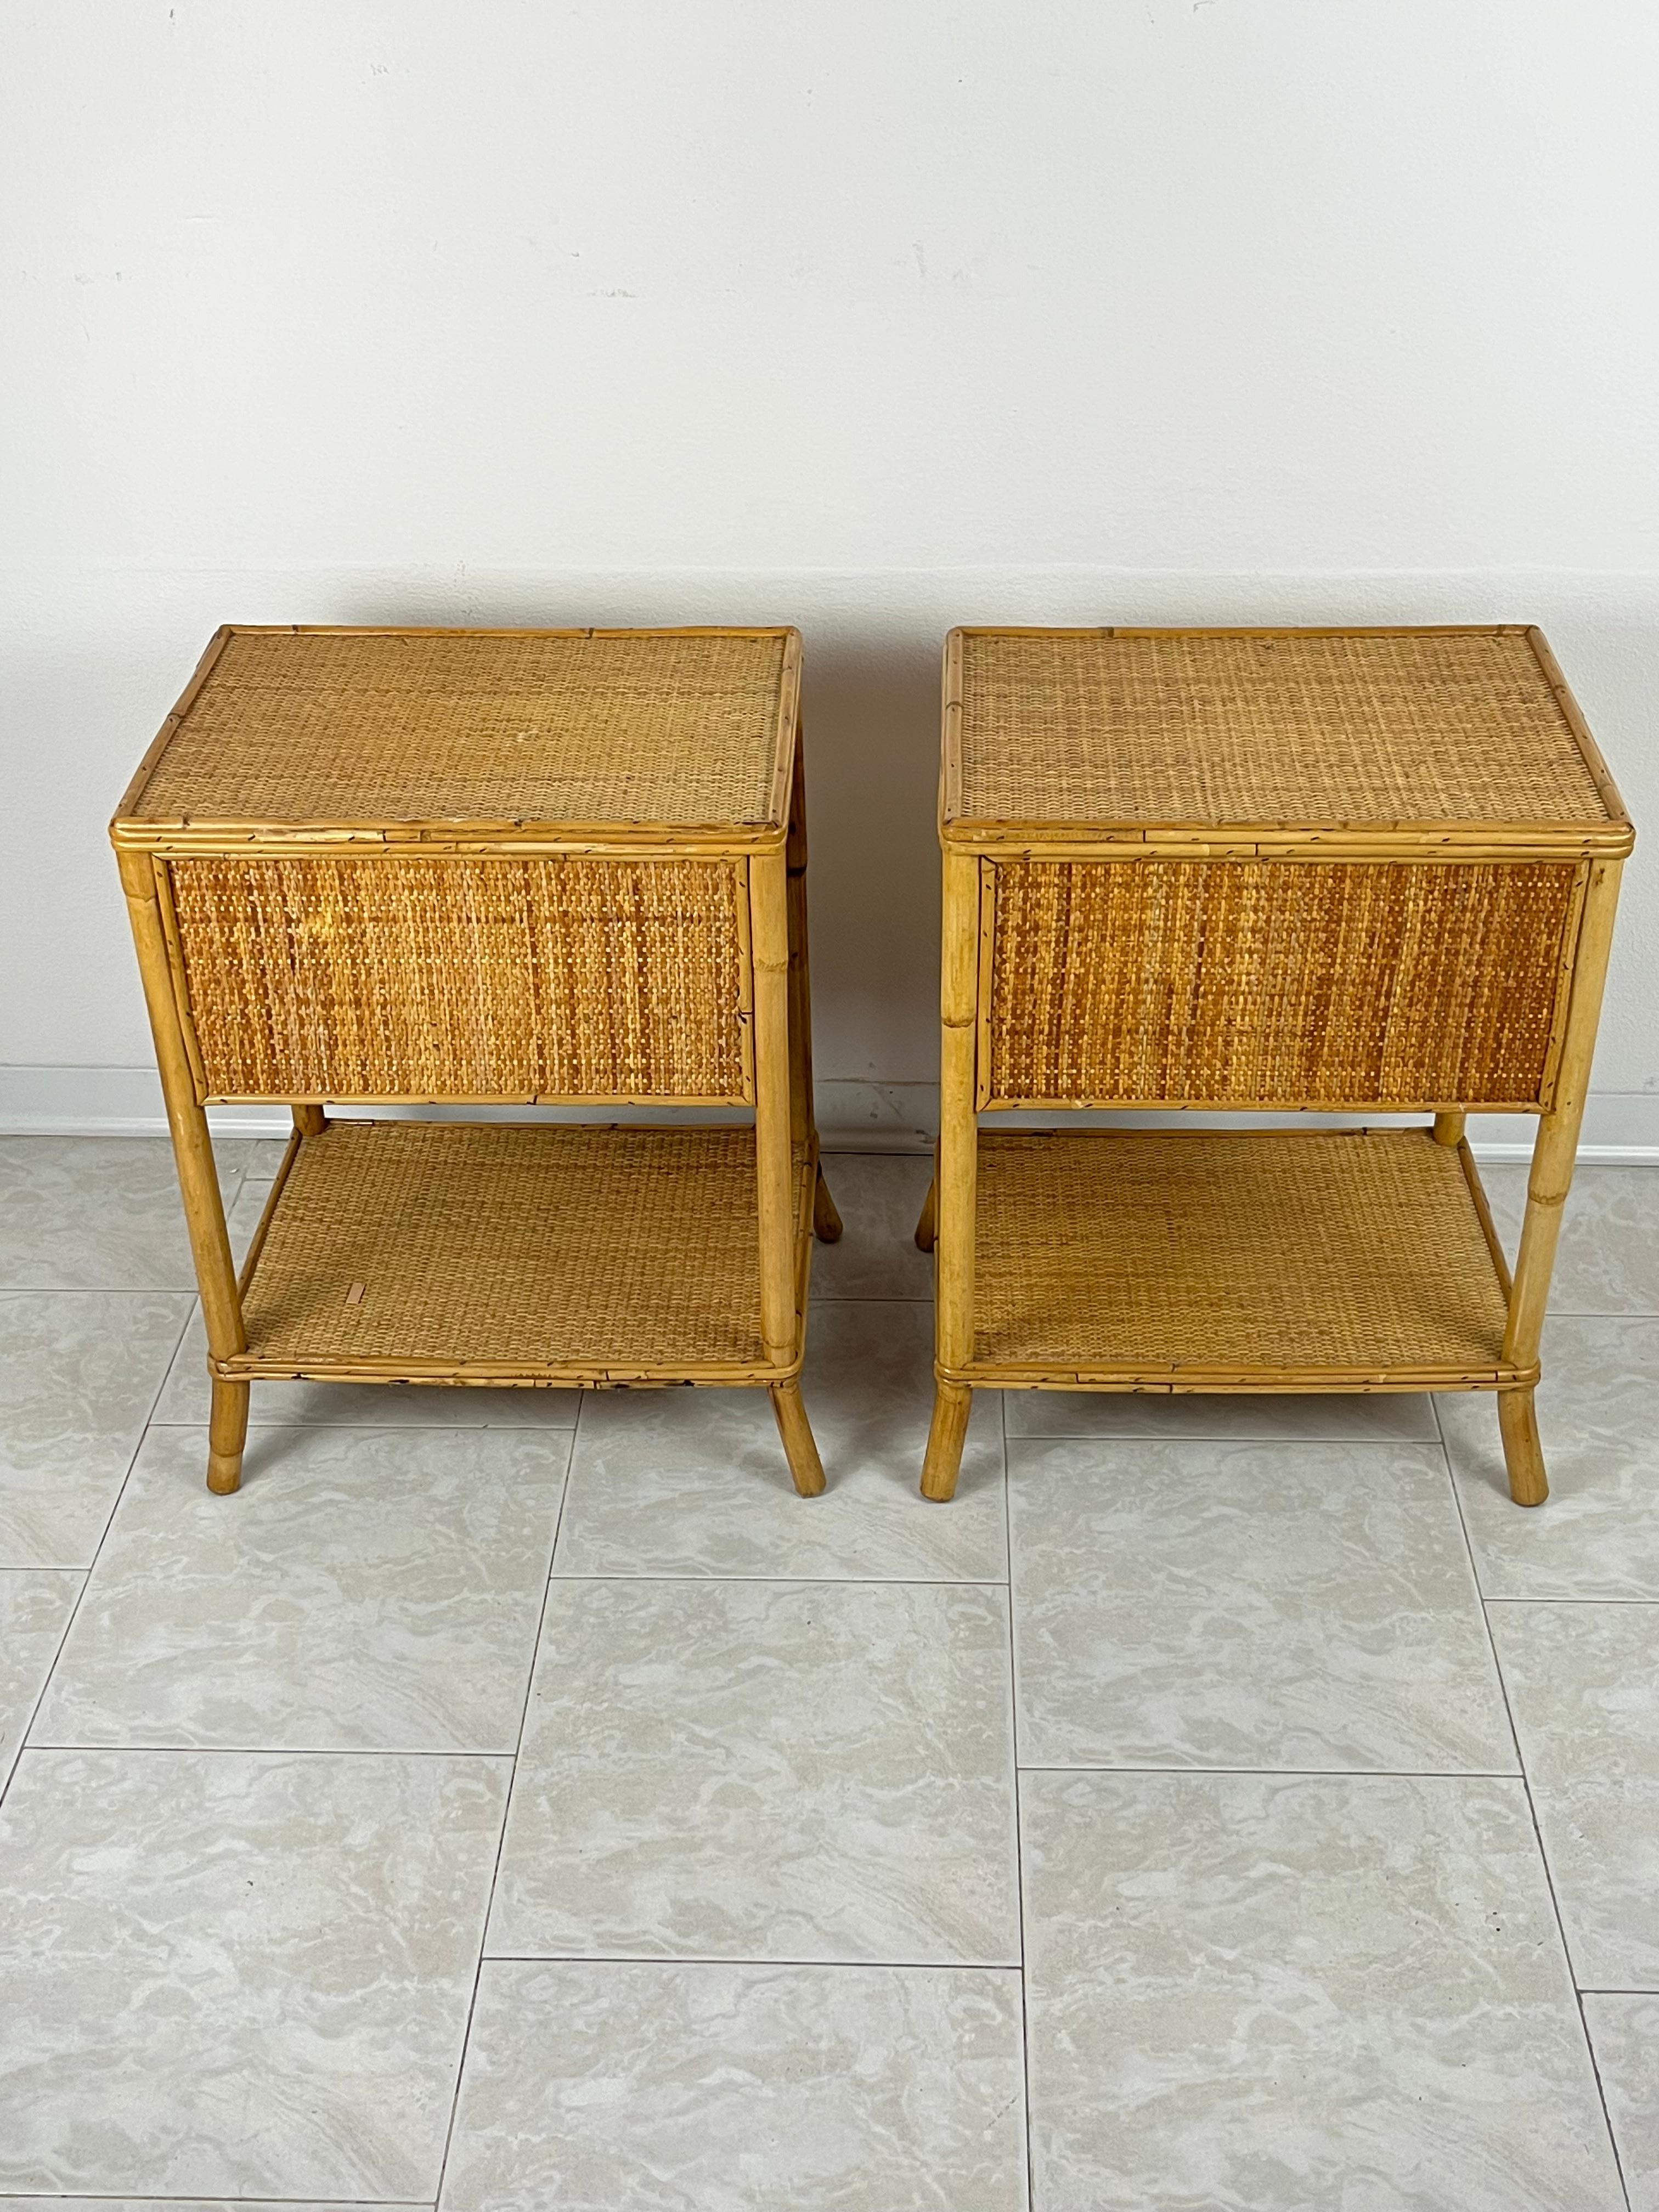 Late 20th Century Pair of Vintage Italian Bamboo and Rattan Bedside Tables 1970s